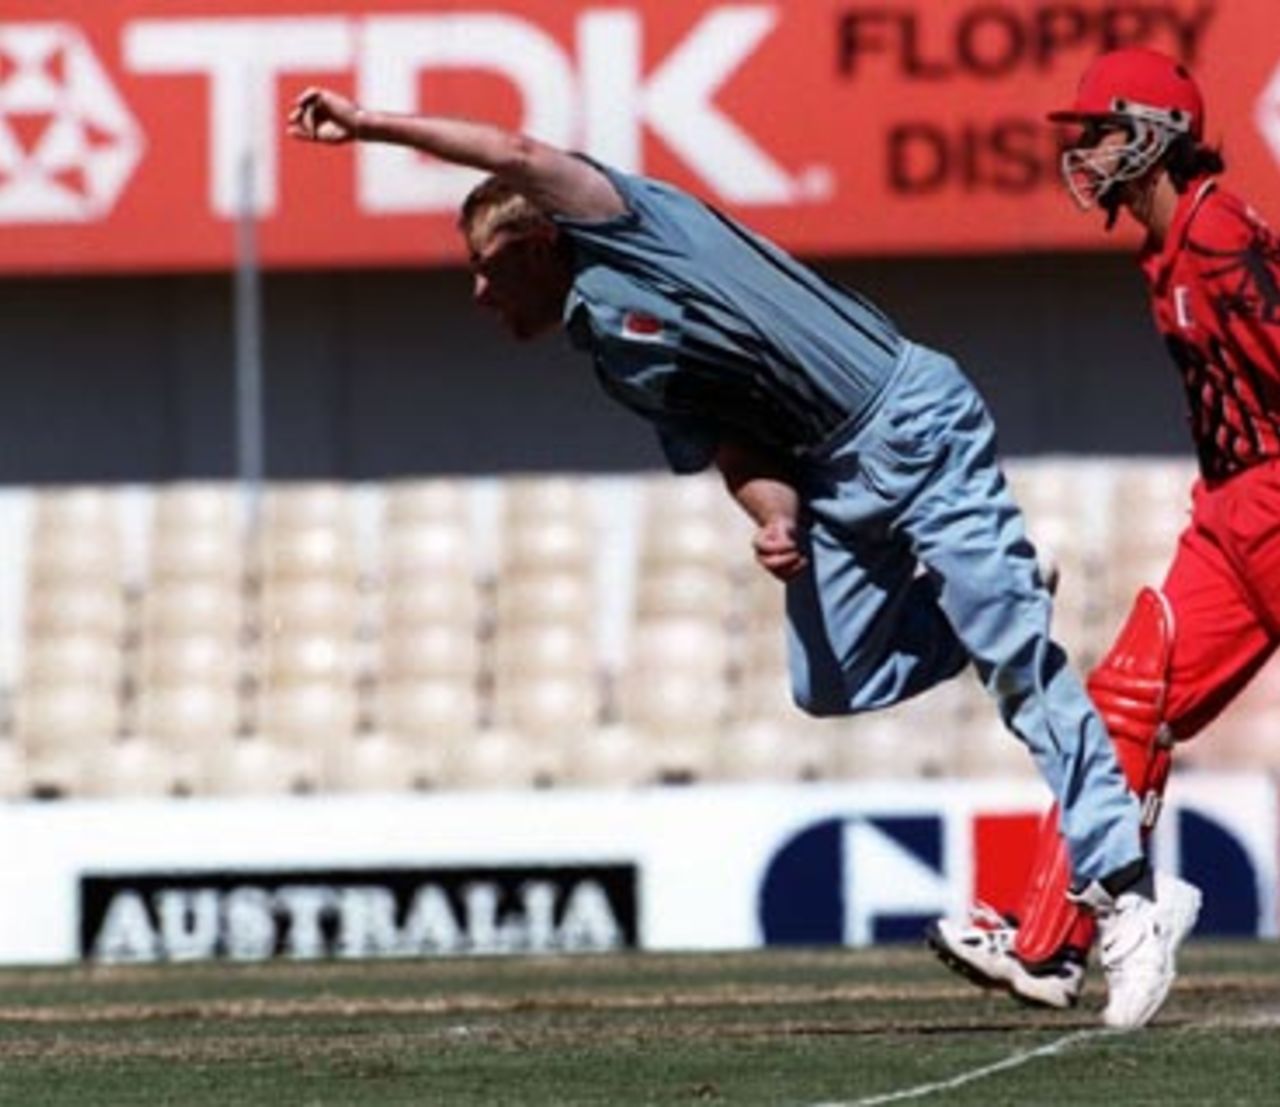 Scott Thompson bowls on his way to career best figures ... New South Wales v South Australia in the semi final of the MMC OD Series at the Sydney Cricket Ground, Sunday February 22nd 1998